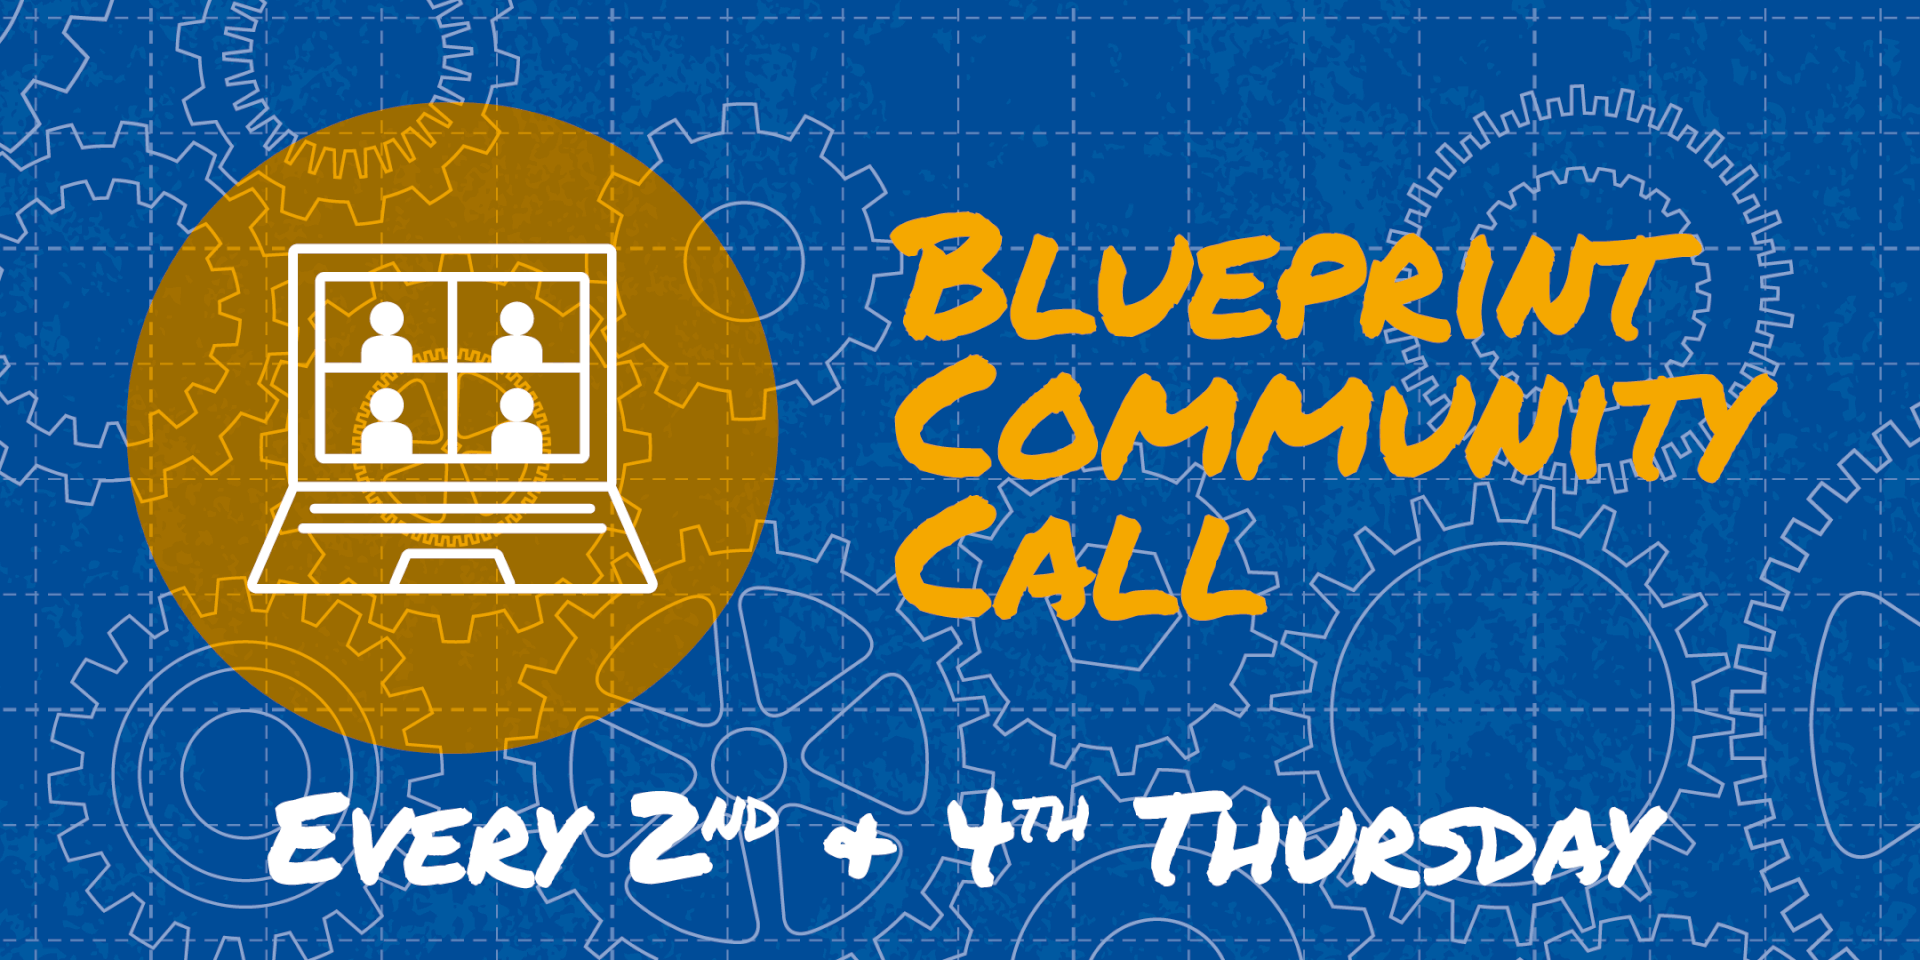 https://wellbeingblueprint.org/wp-content/uploads/2022/01/WBB_CommunityCall_2160x1080px_rev2.png